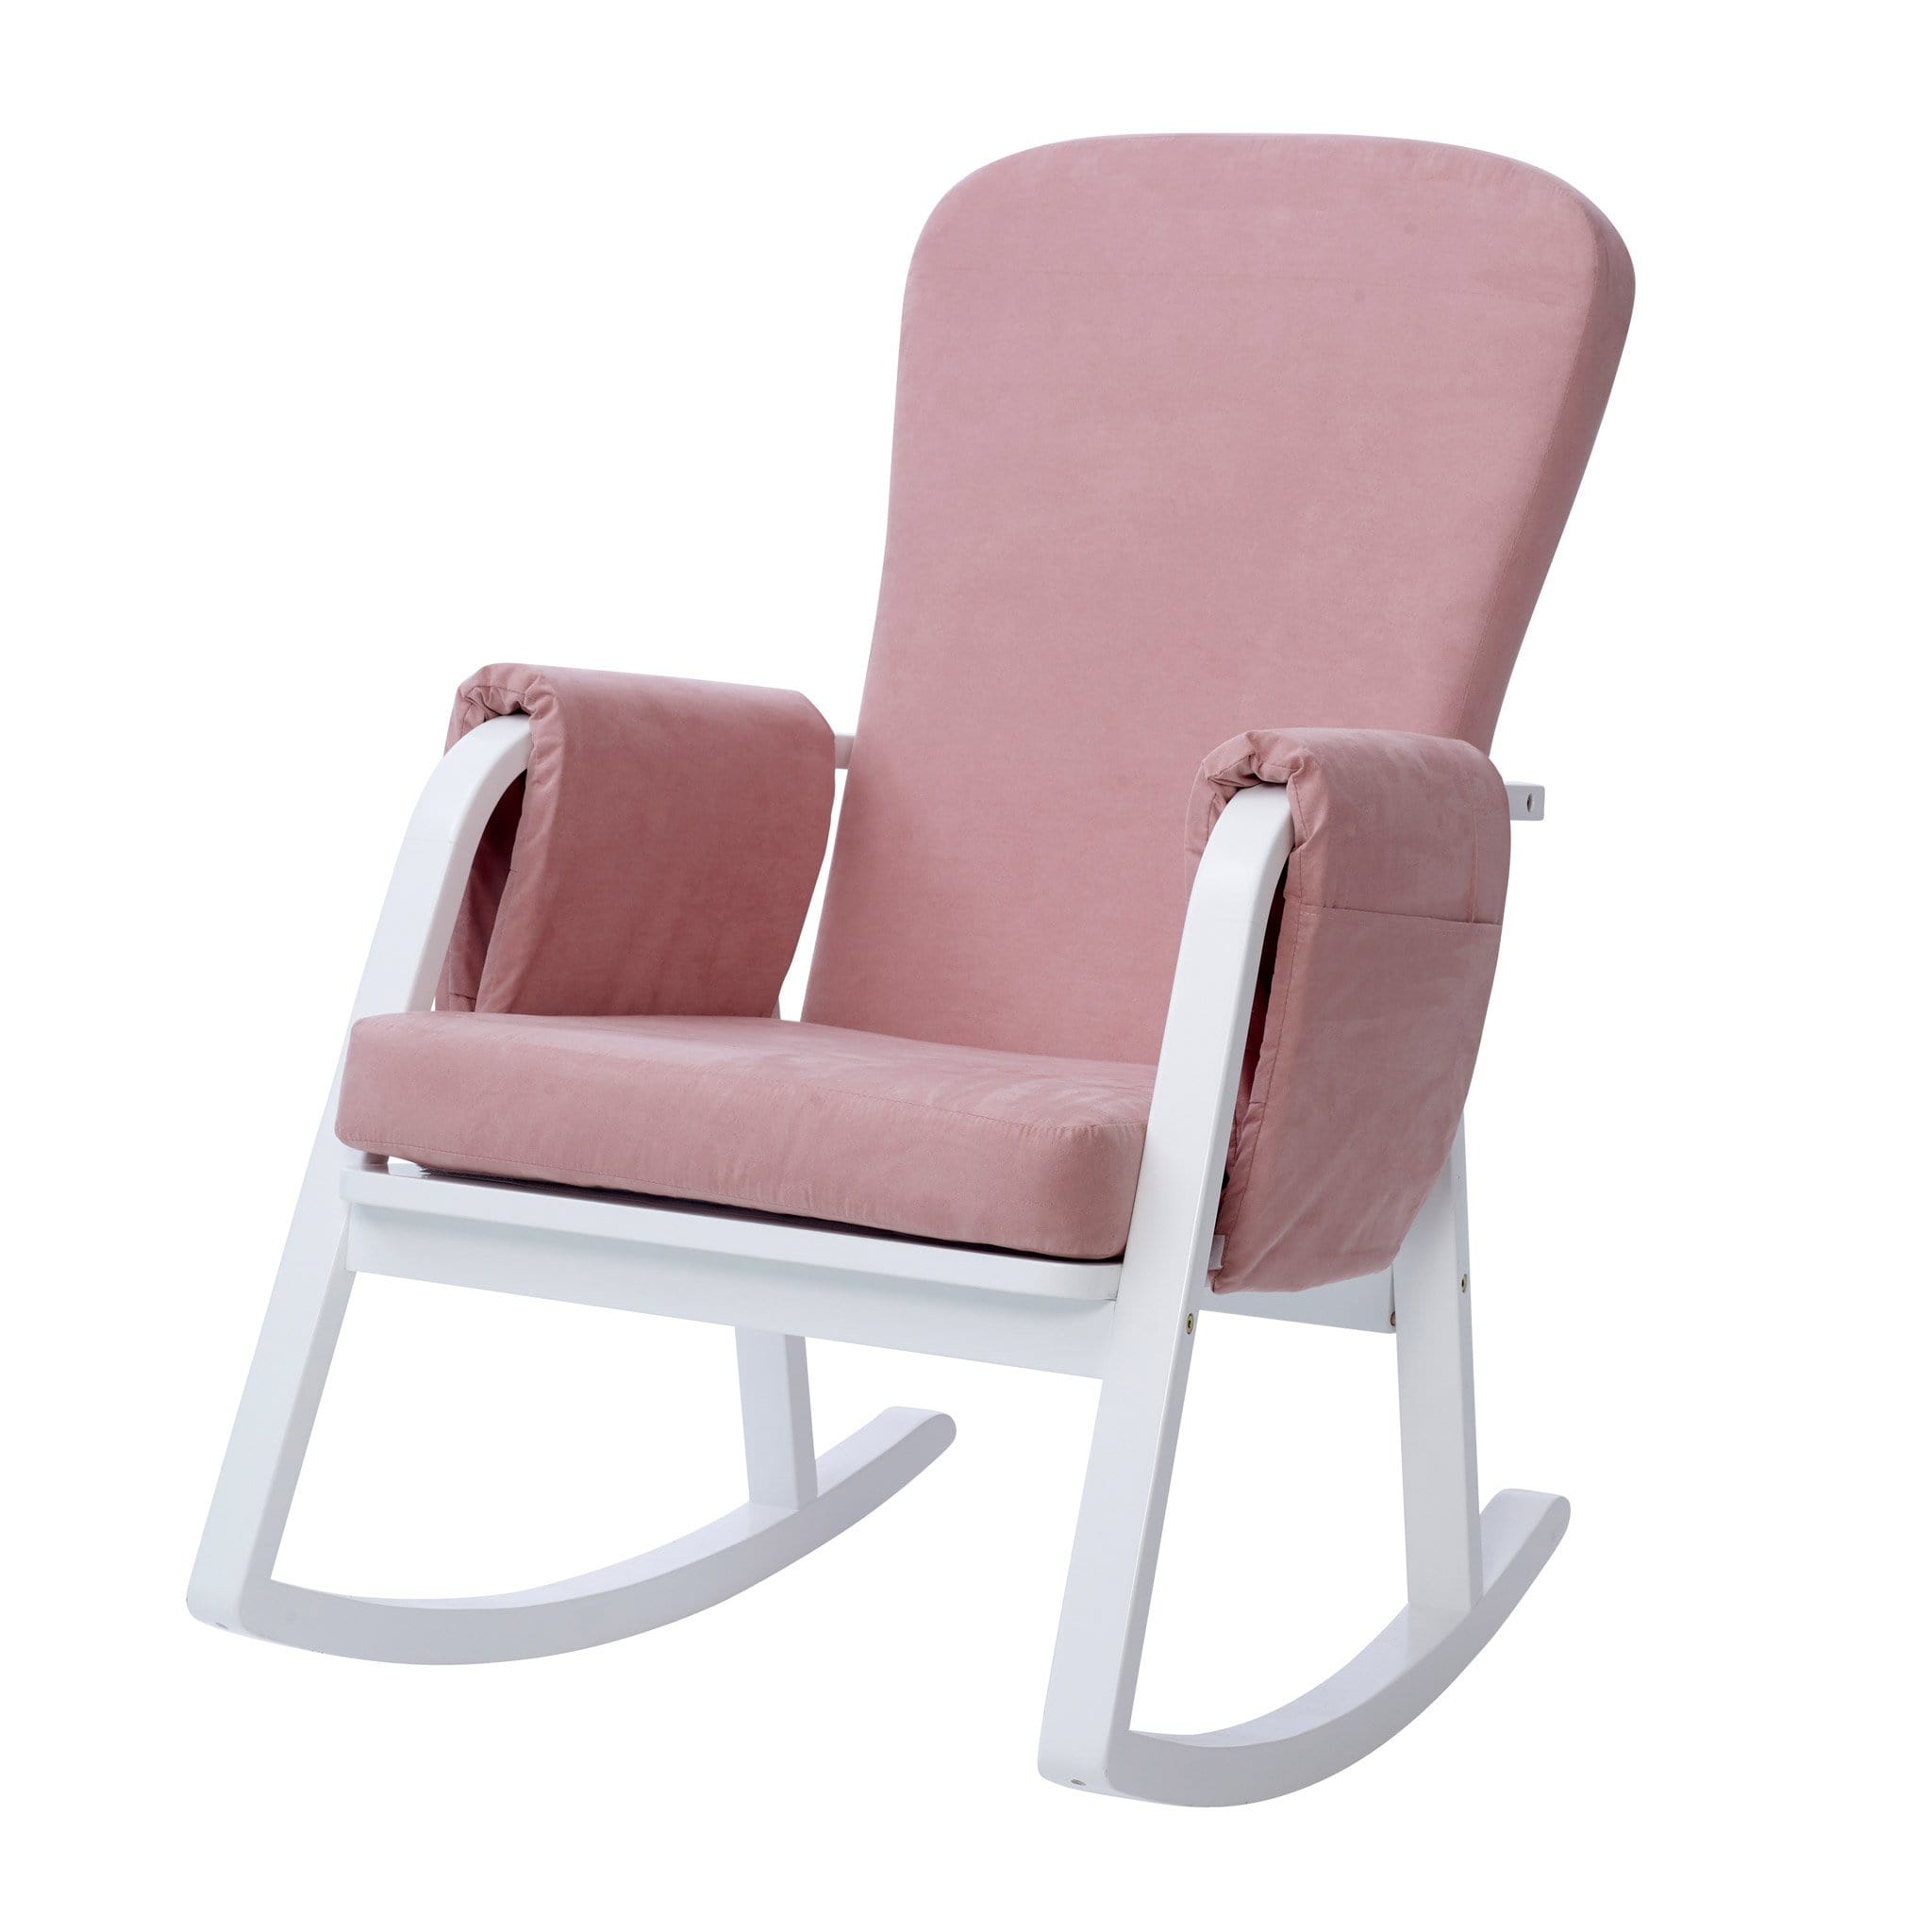 Ickle Bubba Dursley Rocking Chair and Stool Blush Pink Nursing Chairs 48-005-000-841 5060738074334